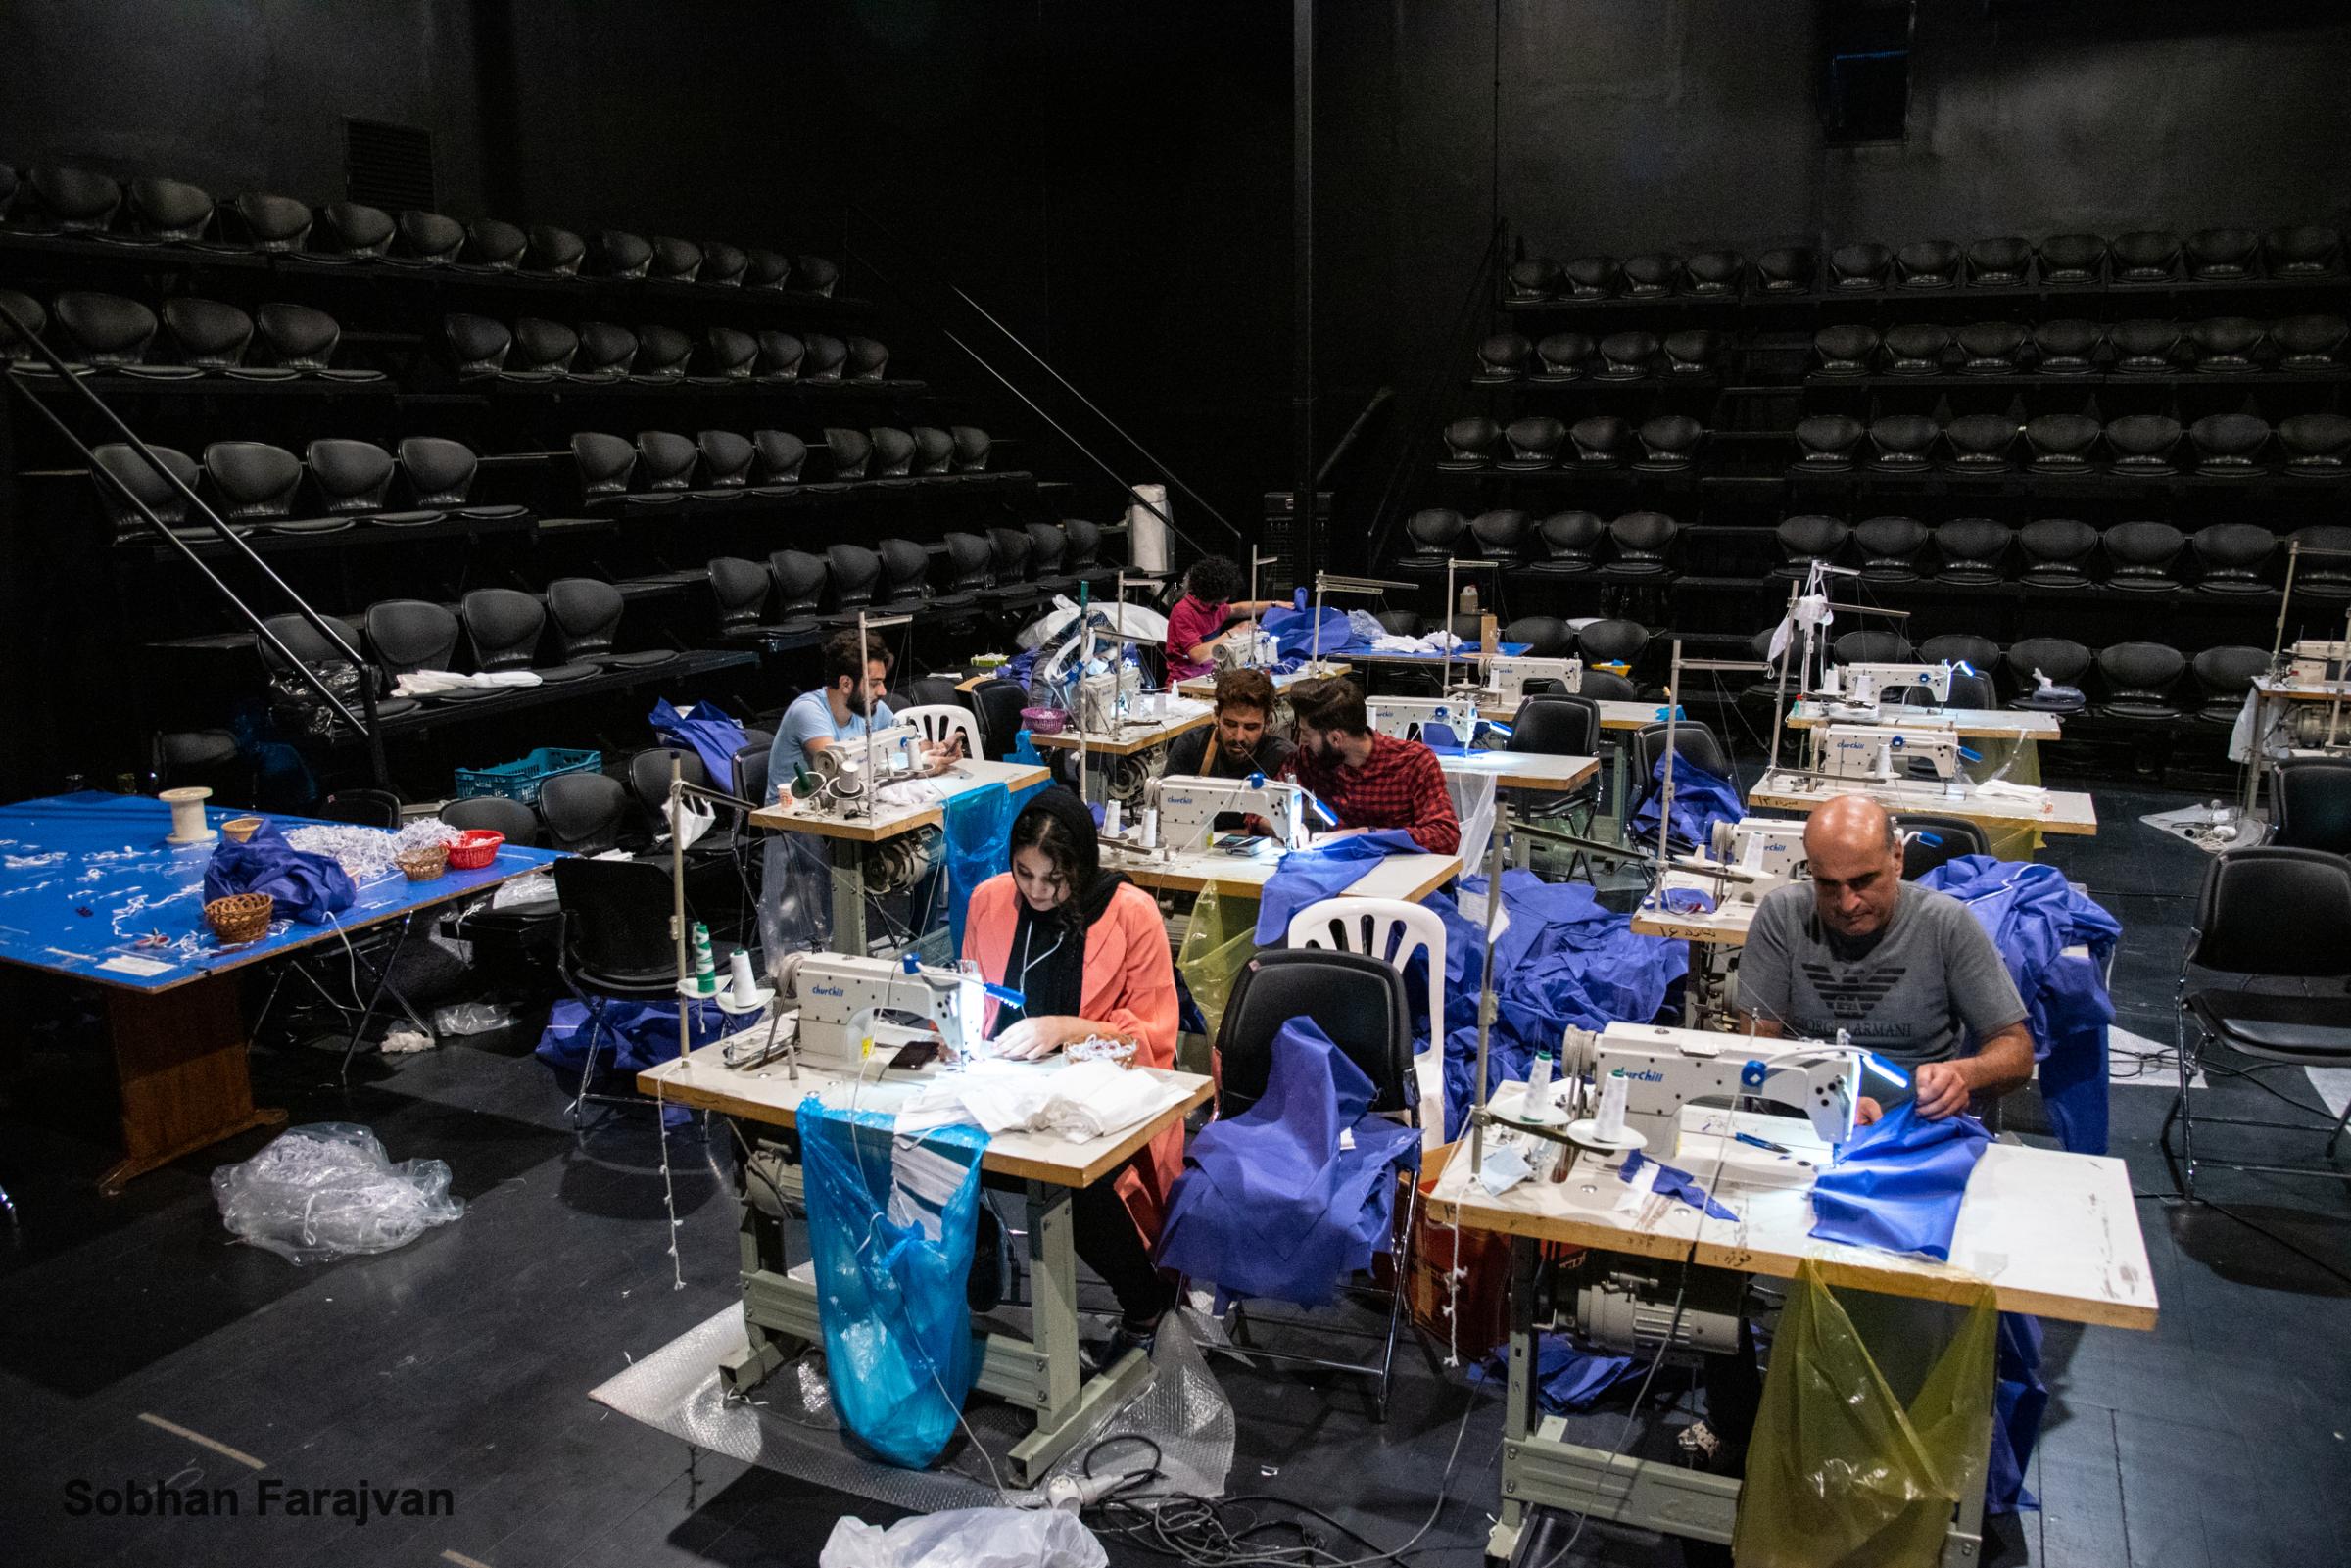 COVID-19 pandemic in Iran (2020-2022) - A volunteer group of theater members sew protection masks...